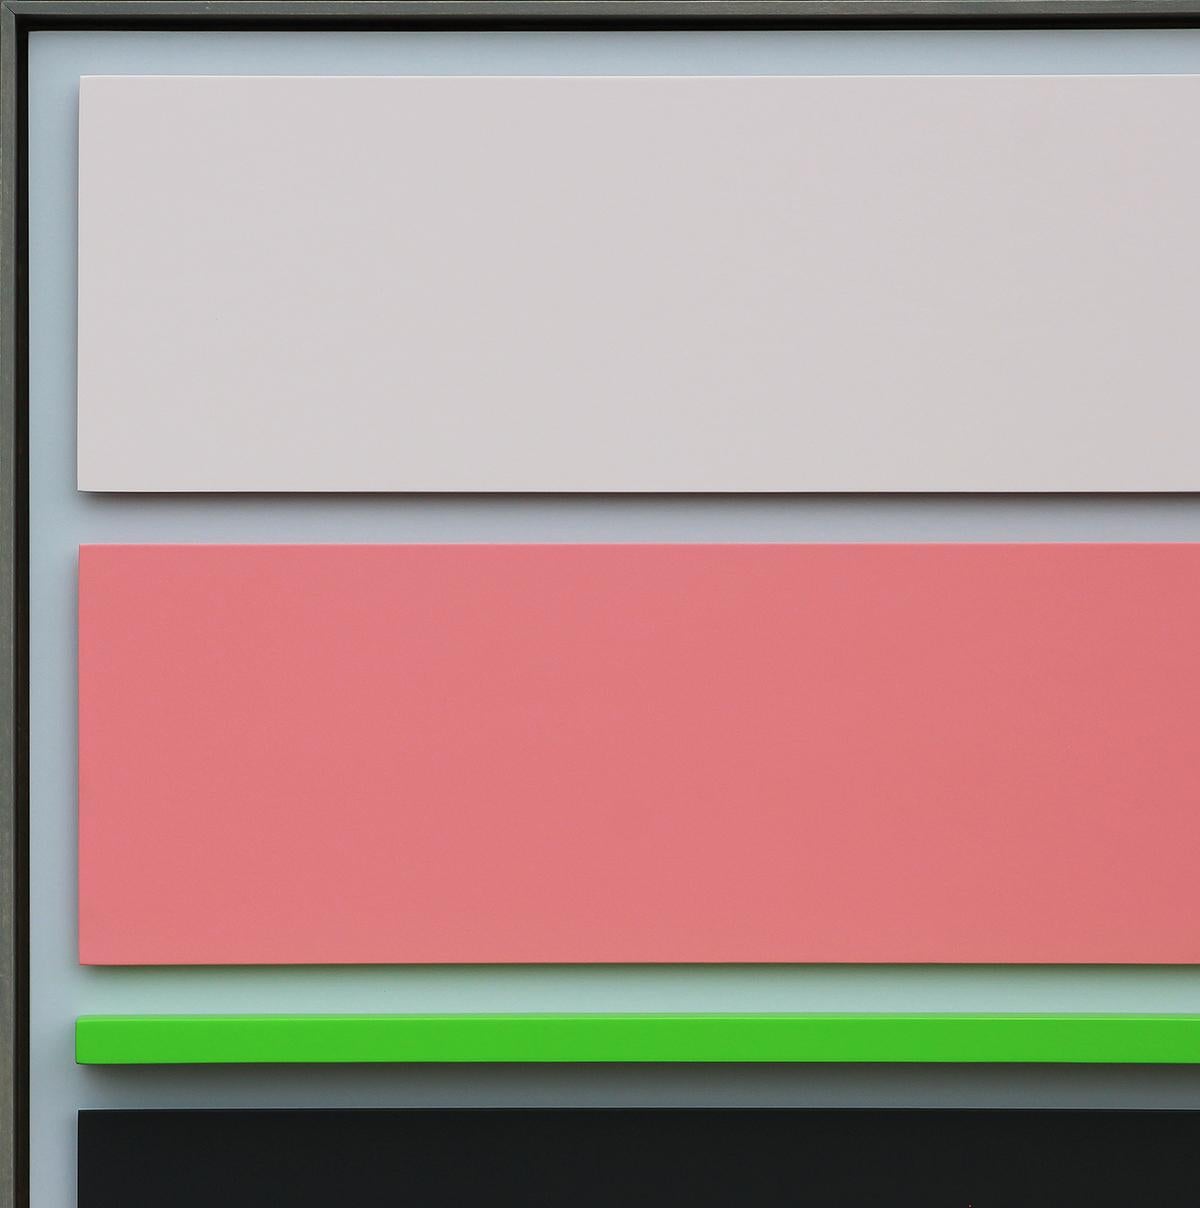 “Green’s Cut” Abstract Geometric Floating Pink Ombre Rectangle Painting - Contemporary Sculpture by Matthew Reeves